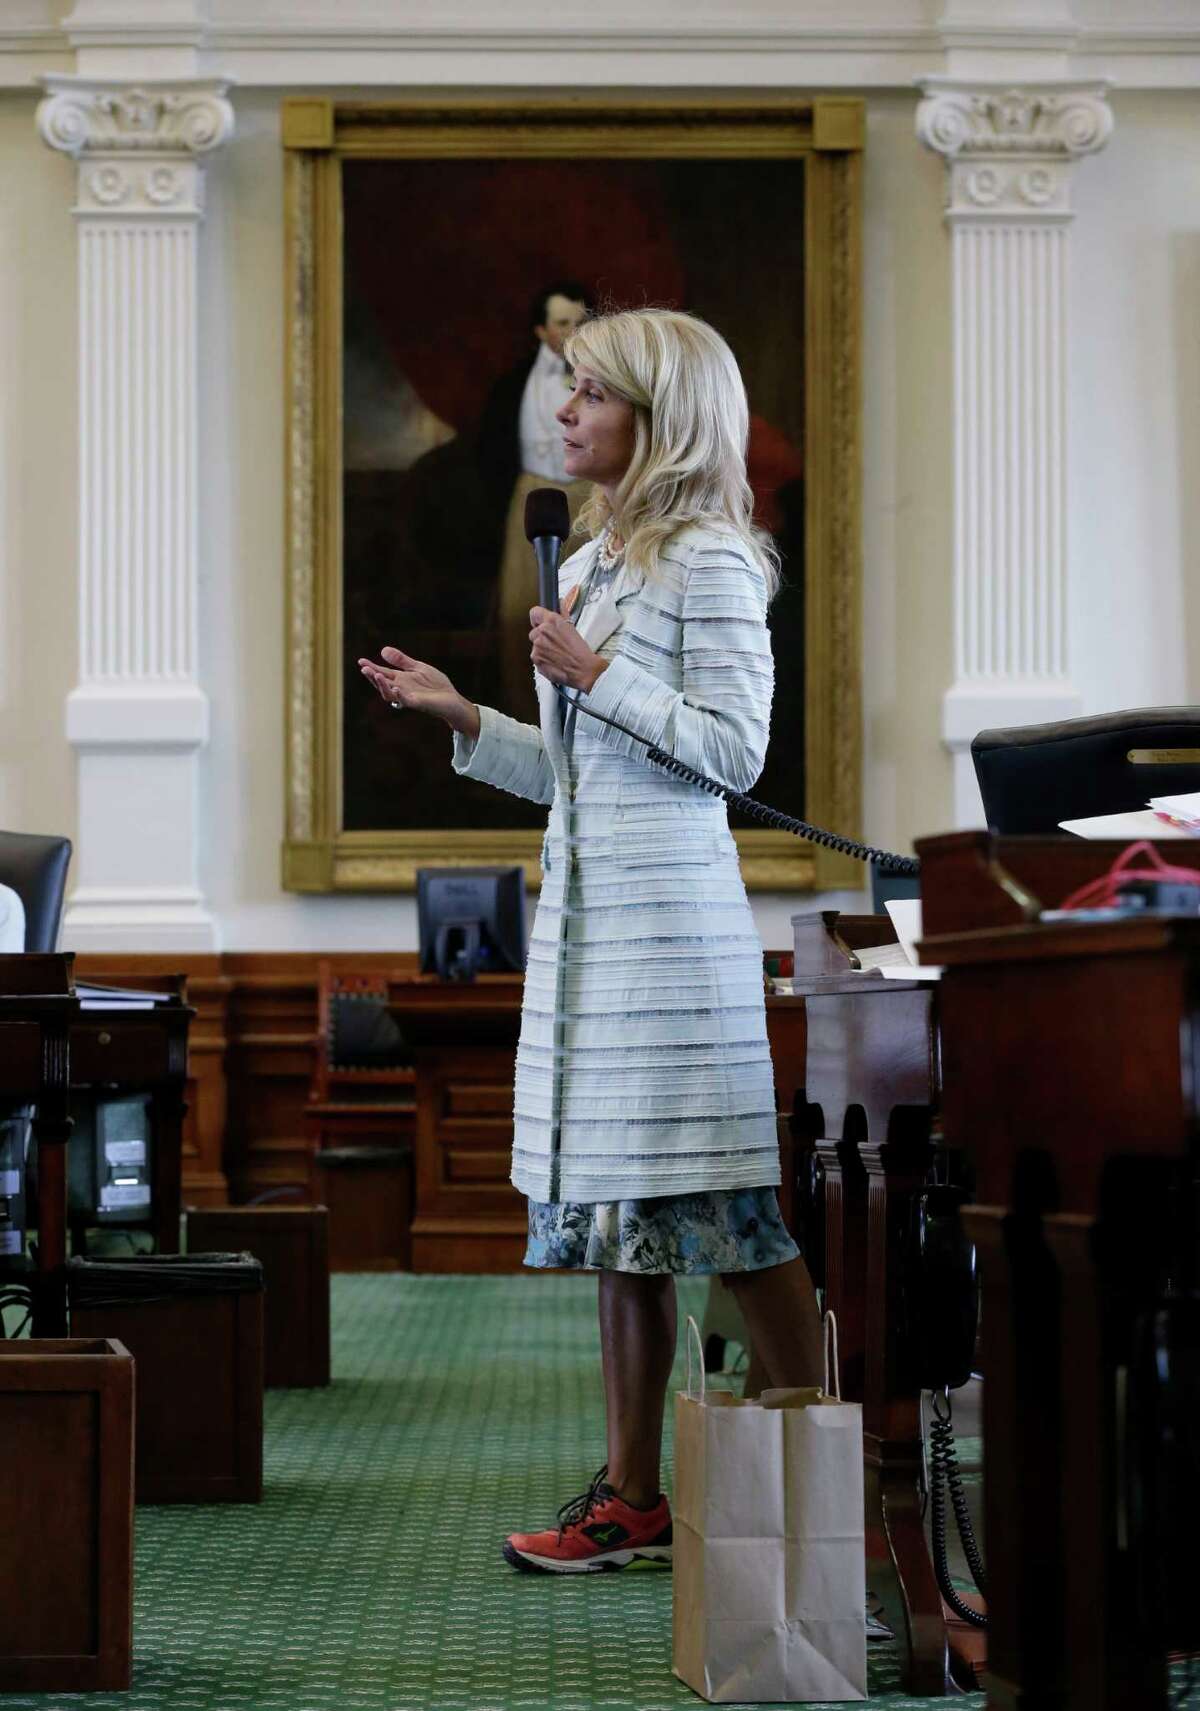 Sen. Wendy Davis, D-Fort Worth, became a media star a year ago with her filibuster against the Texas Legislature's latest assault on abortion rights, then largely shunned the issue in her run for governor.